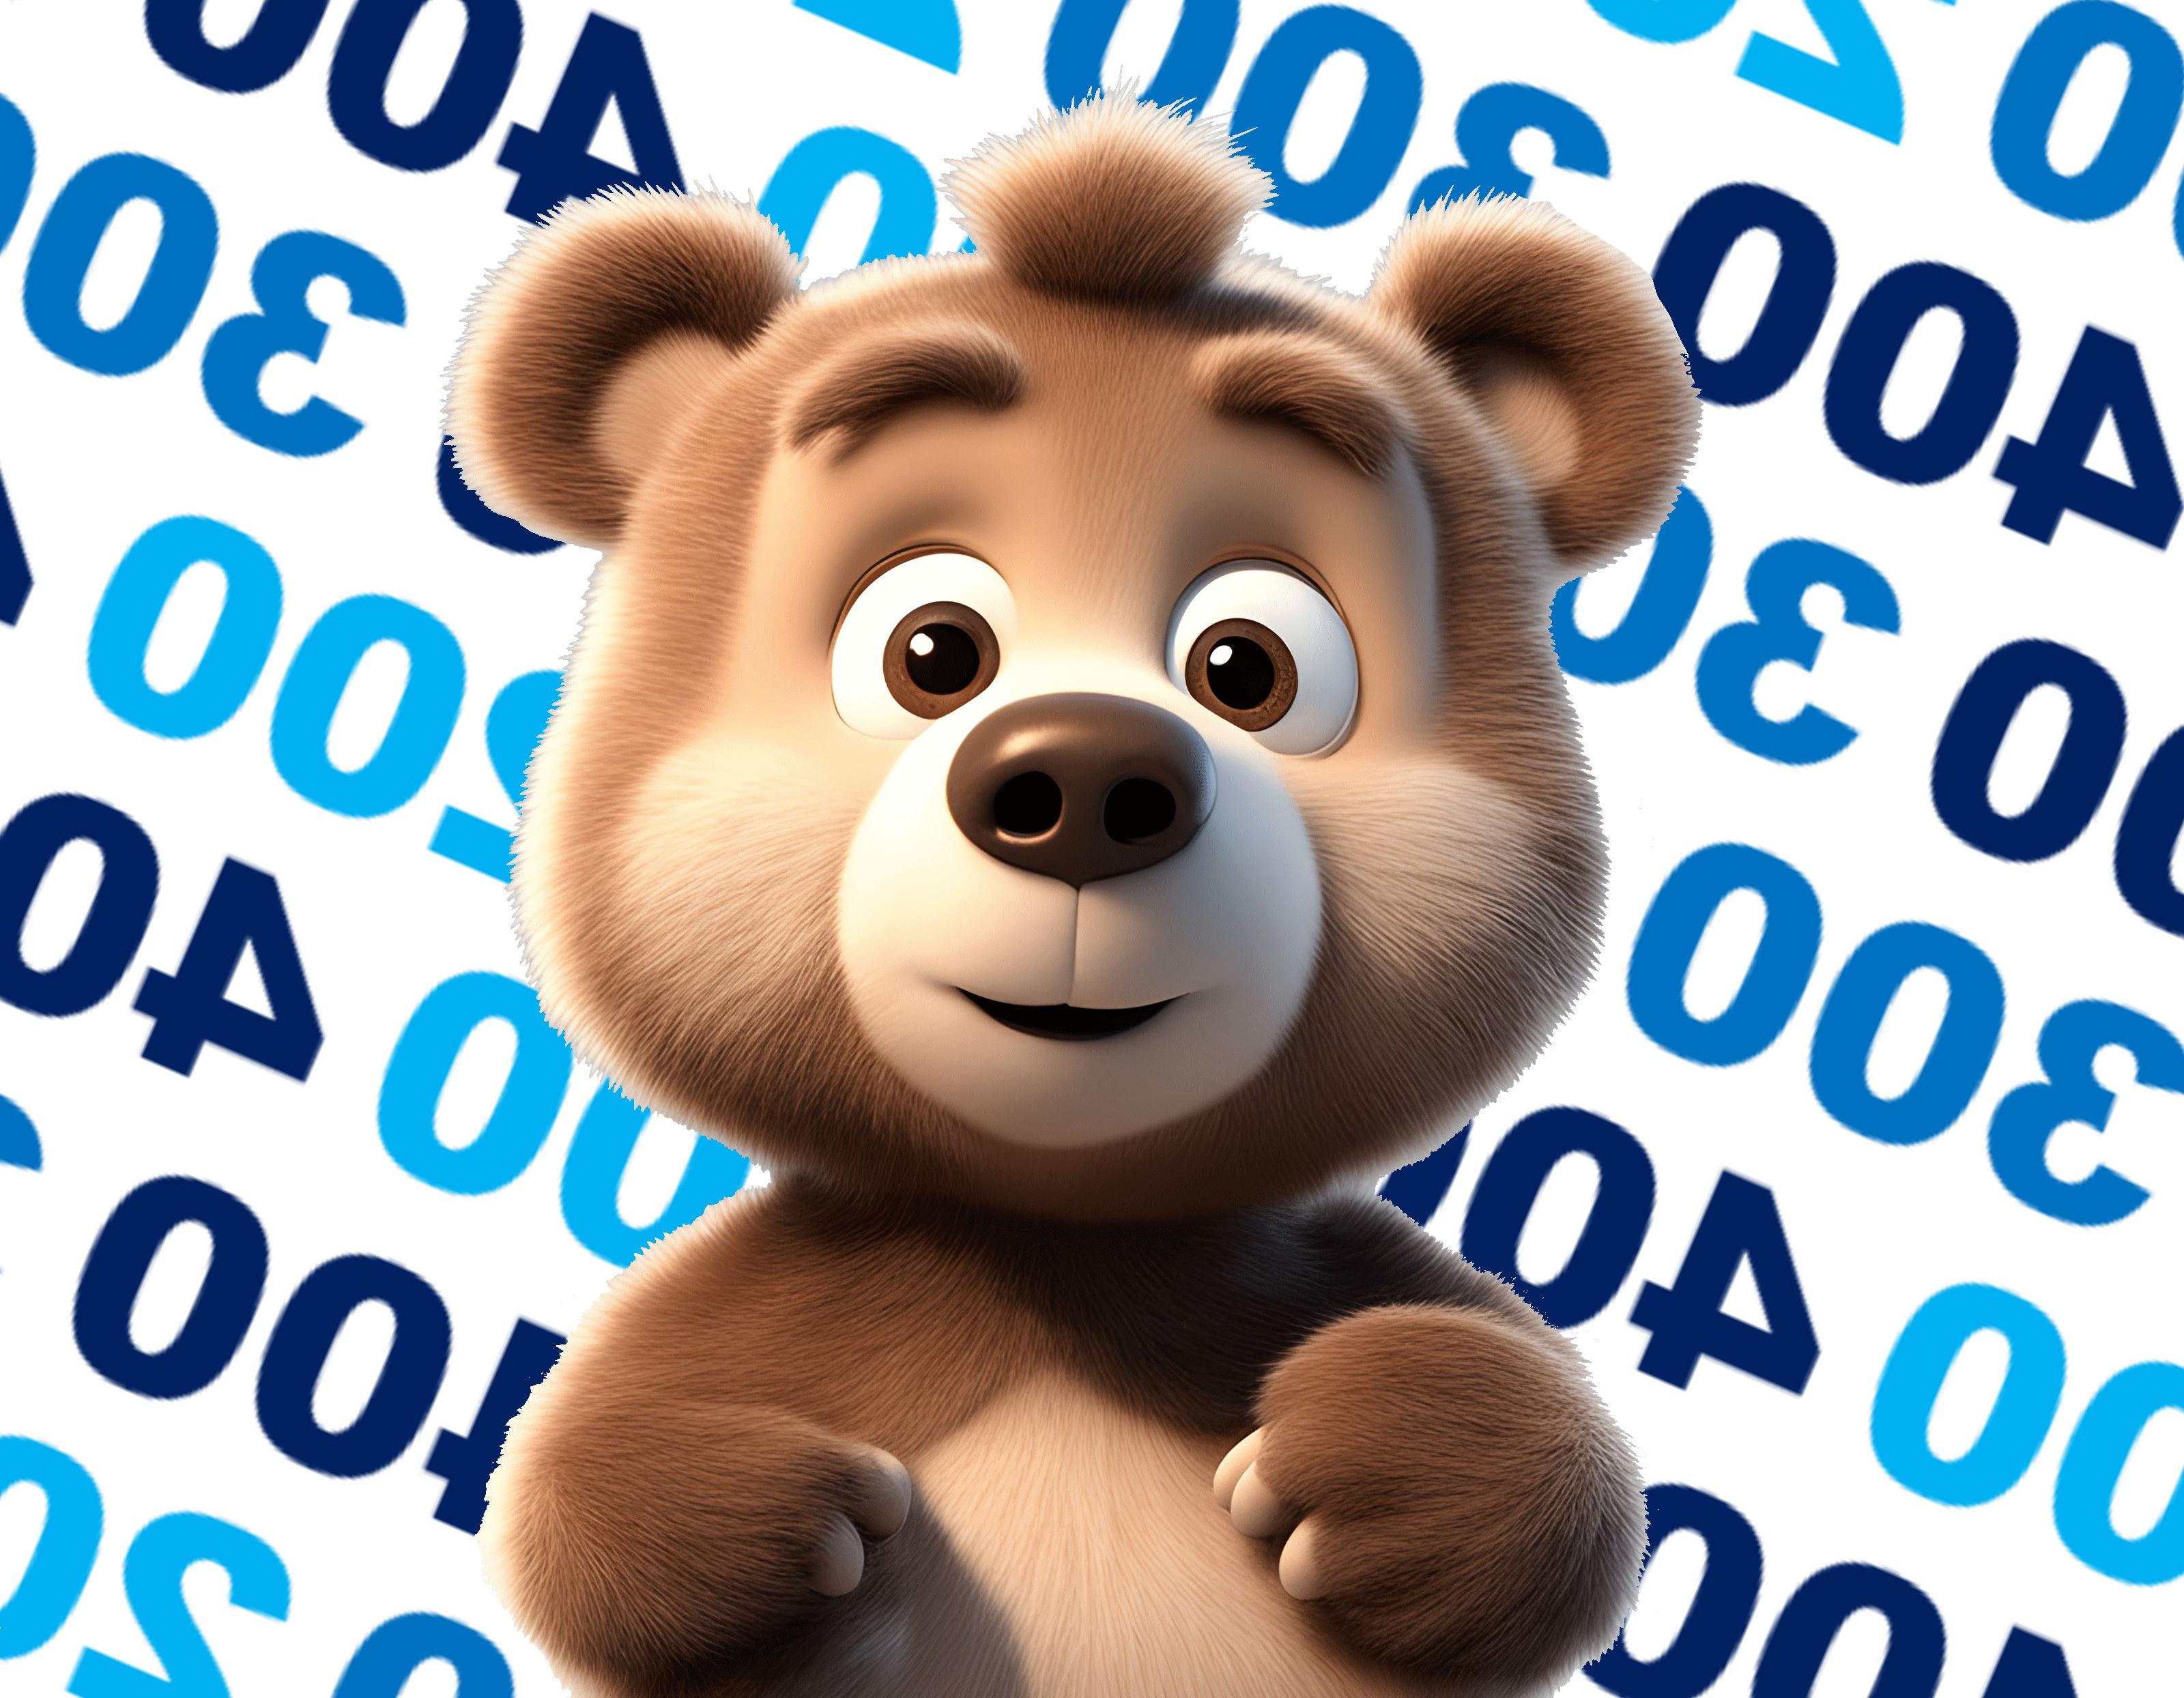 Bear standing in front of Lottery points